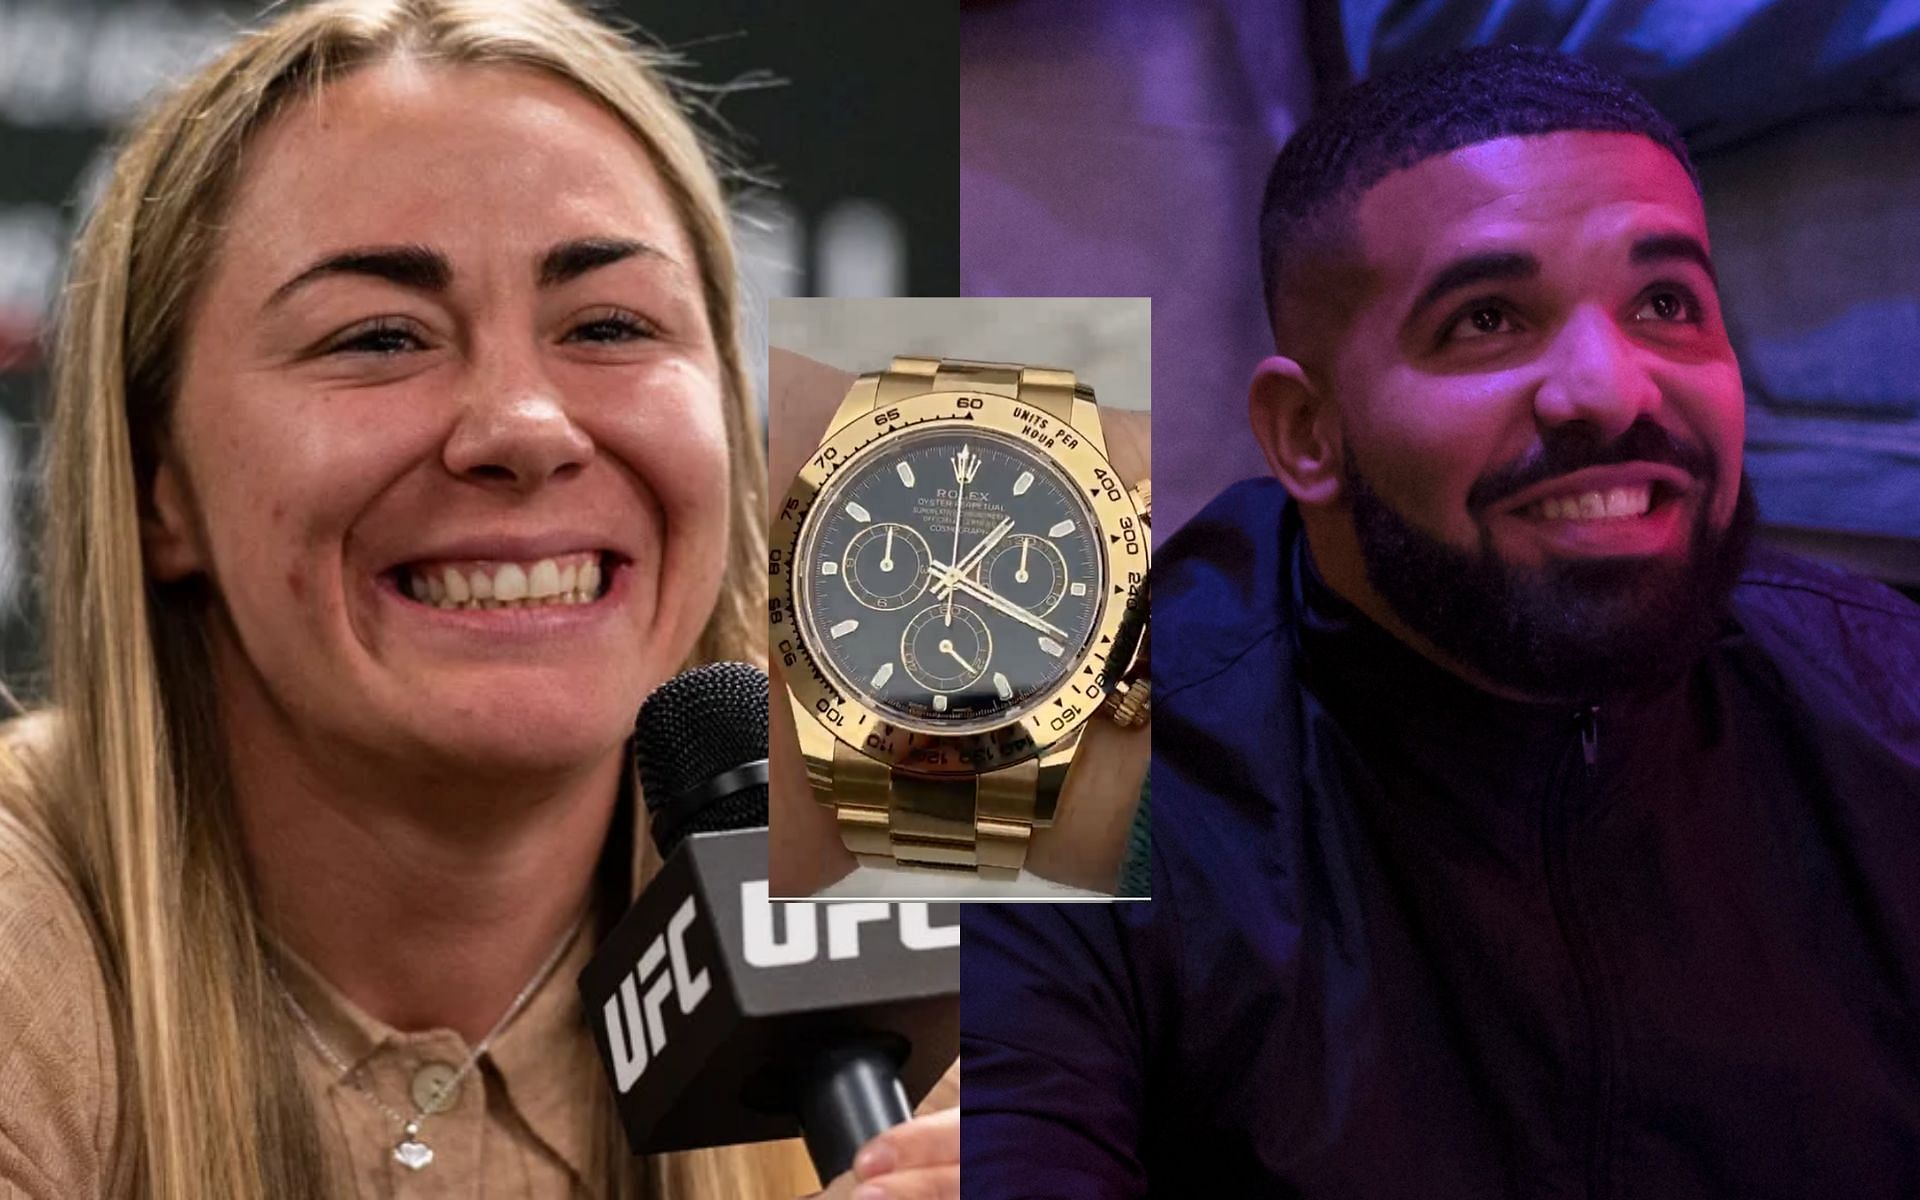 Molly McCann (left), her Rolex gift (center) and Drake (right). [Images courtesy: left image from mmajunkie.com, center image Twitter @MeatballMolly, and right image from Getty Images]